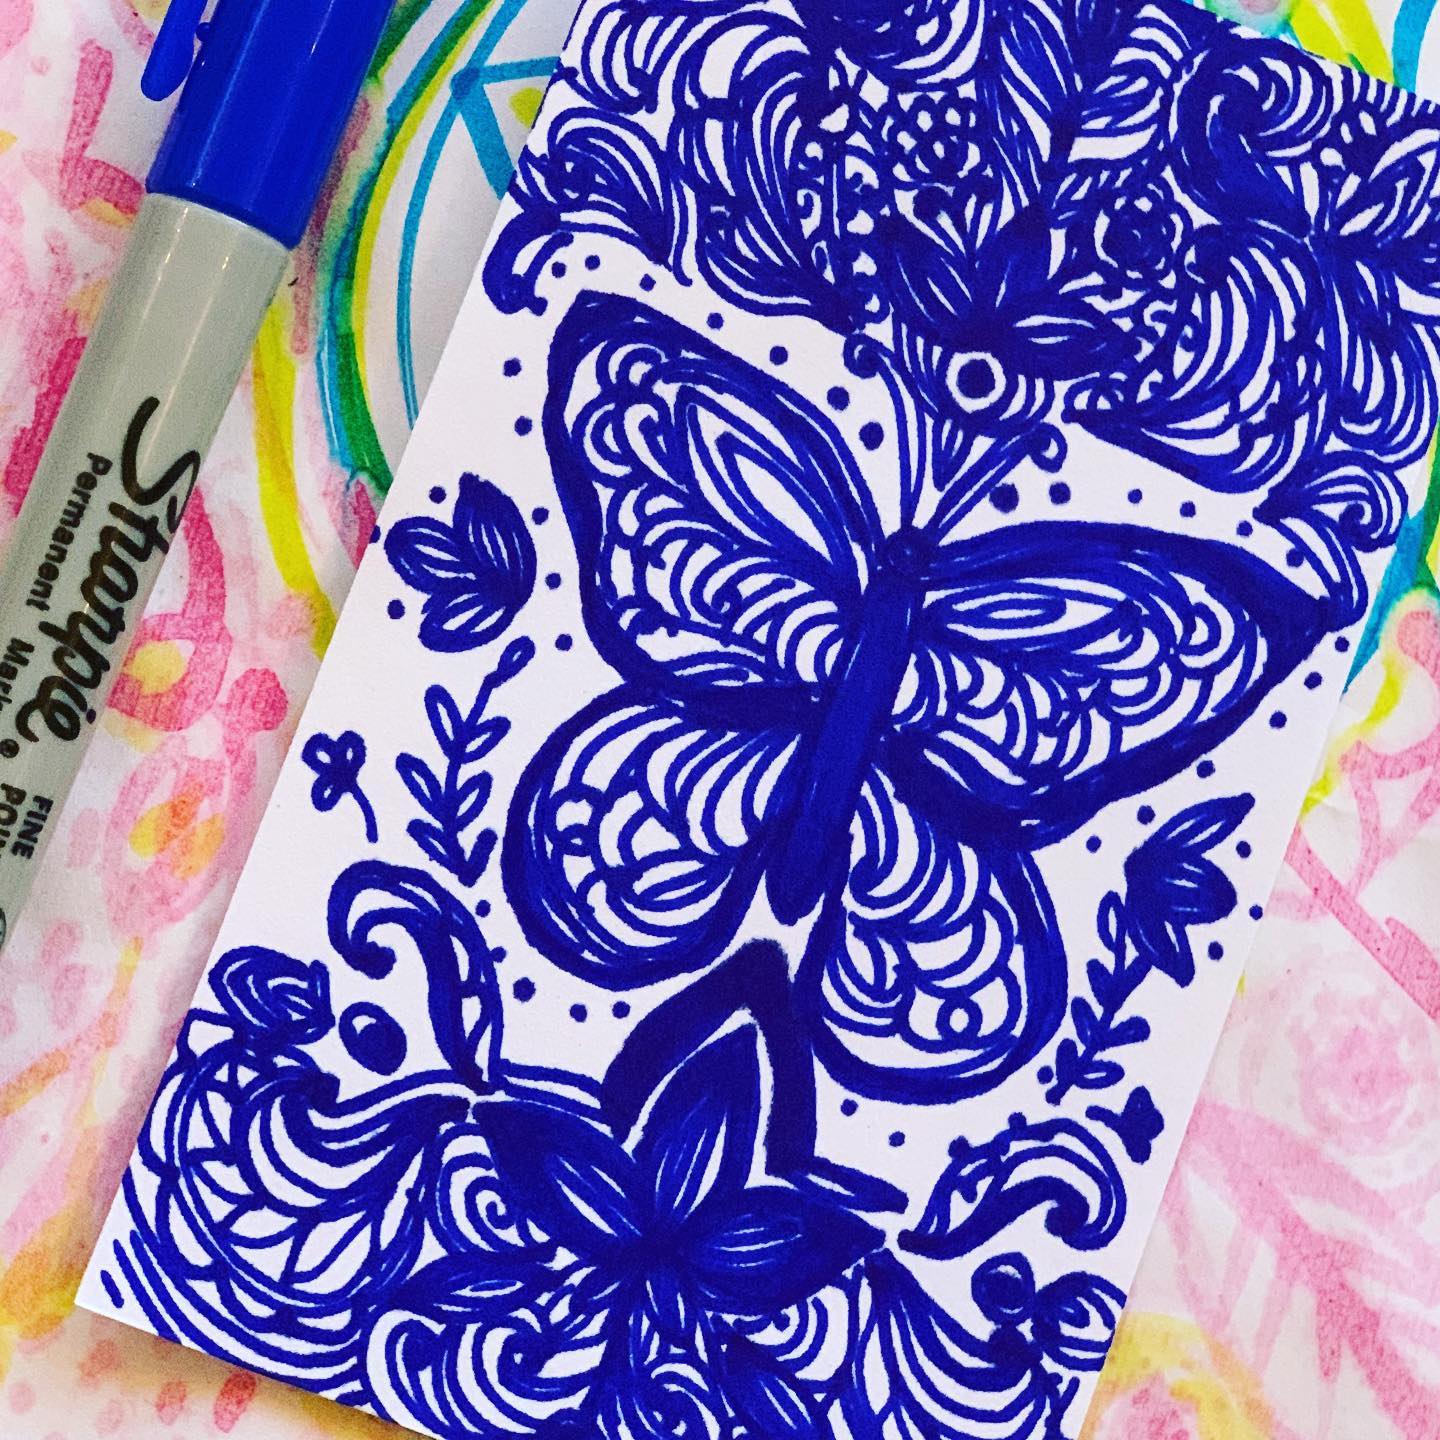 Doodling some butterfly magic!
Haven’t used a Sharpie in a long time...